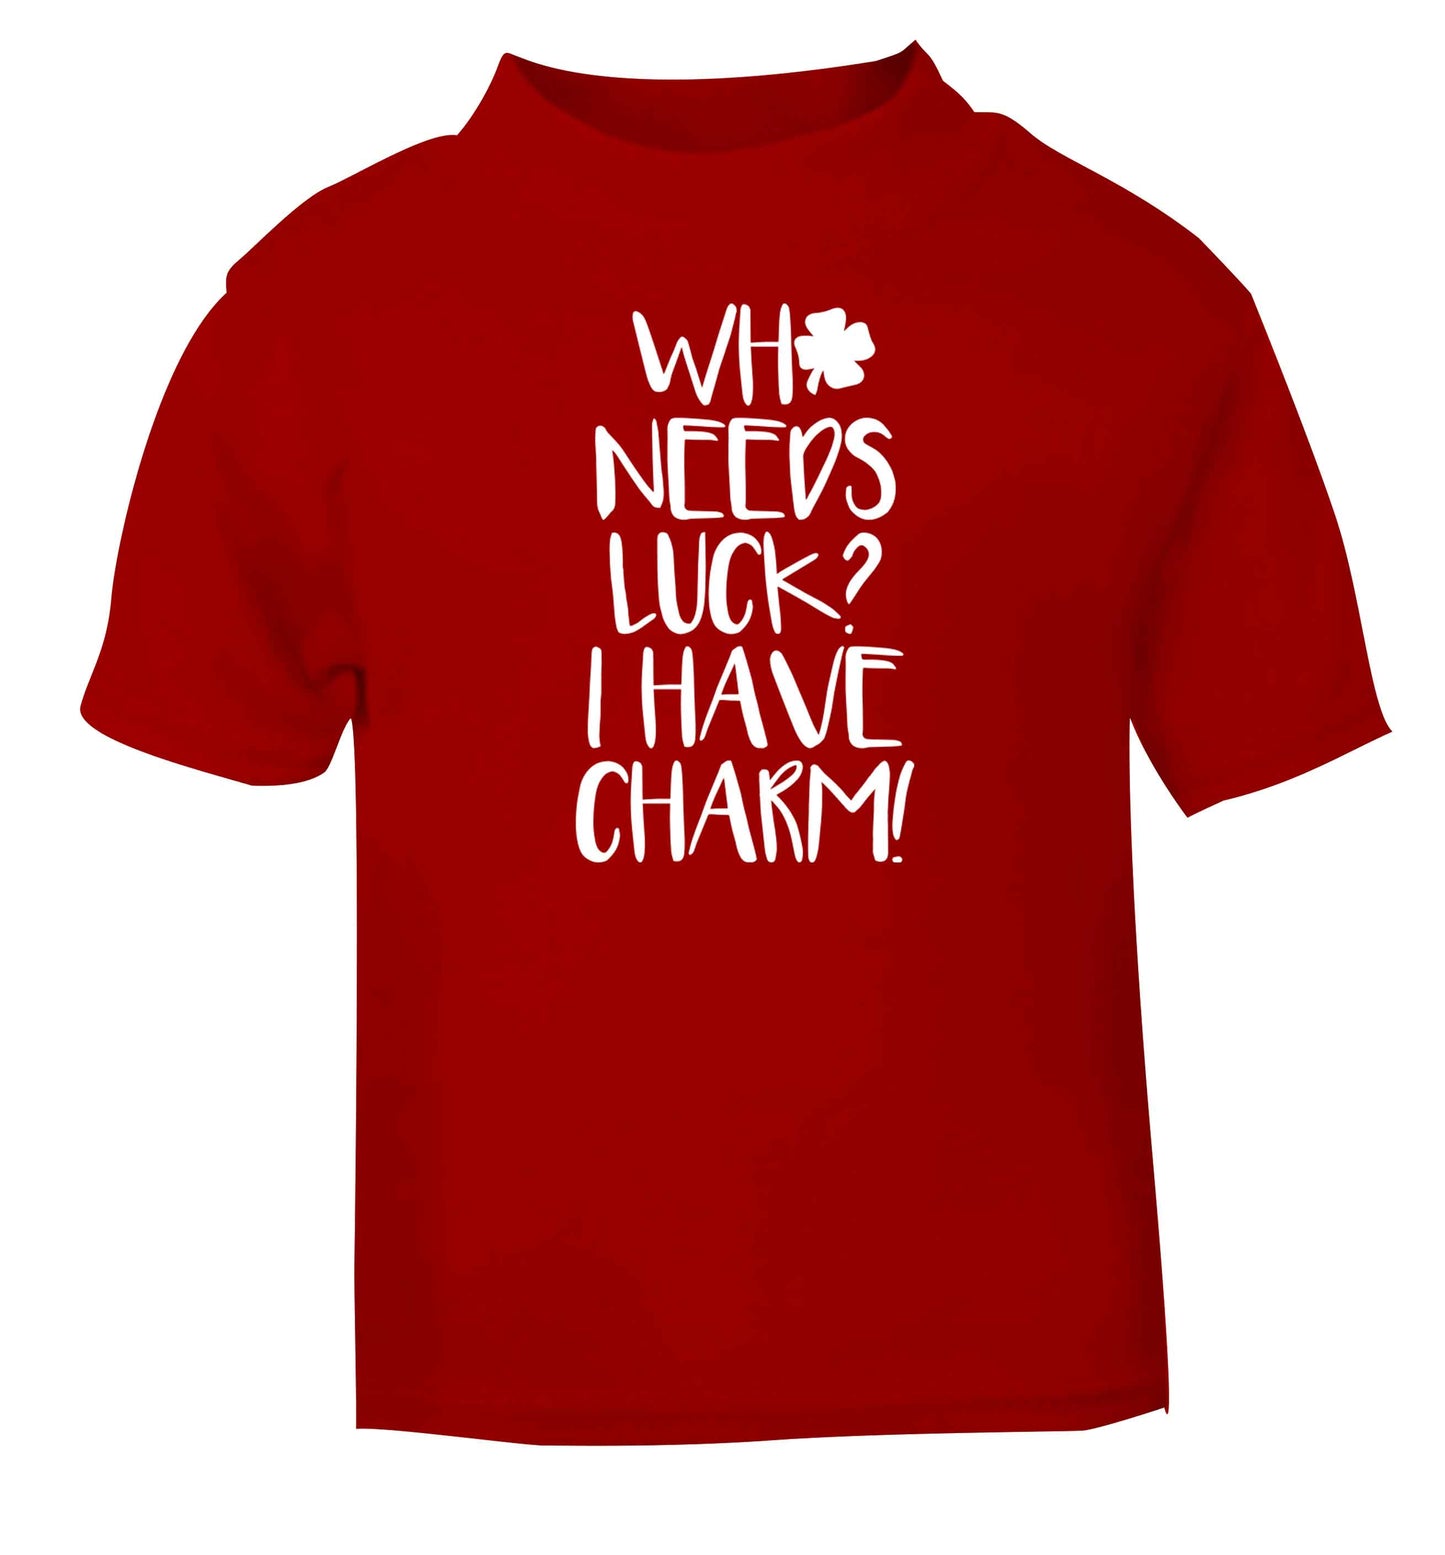 Who needs luck? I have charm! red baby toddler Tshirt 2 Years